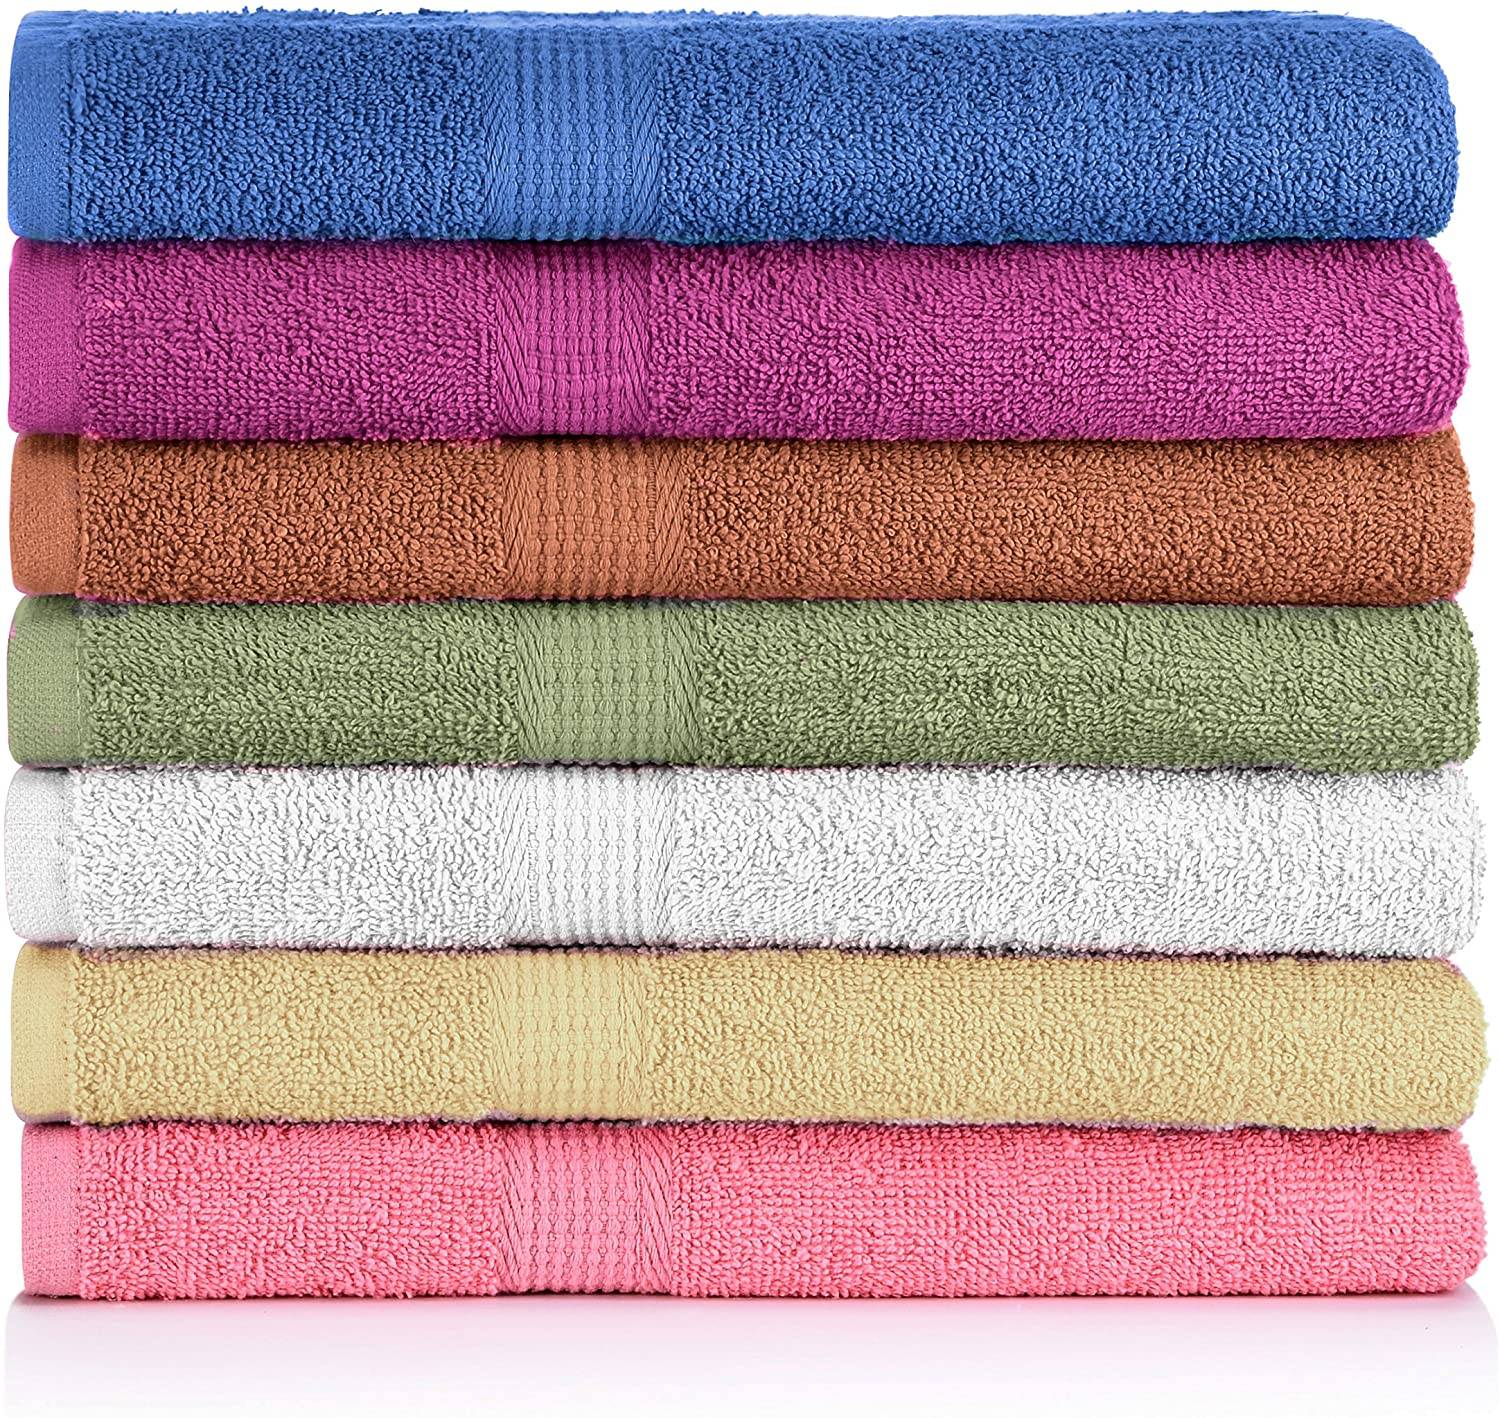 Ordinary Discount Towels - Towels/beach towel/ Bath Towels ,Extra-Absorbent – 100% Cotton – 27×54” Towels, Soft and Quick Dry Swim Terry towels with bright colors   – SUPER